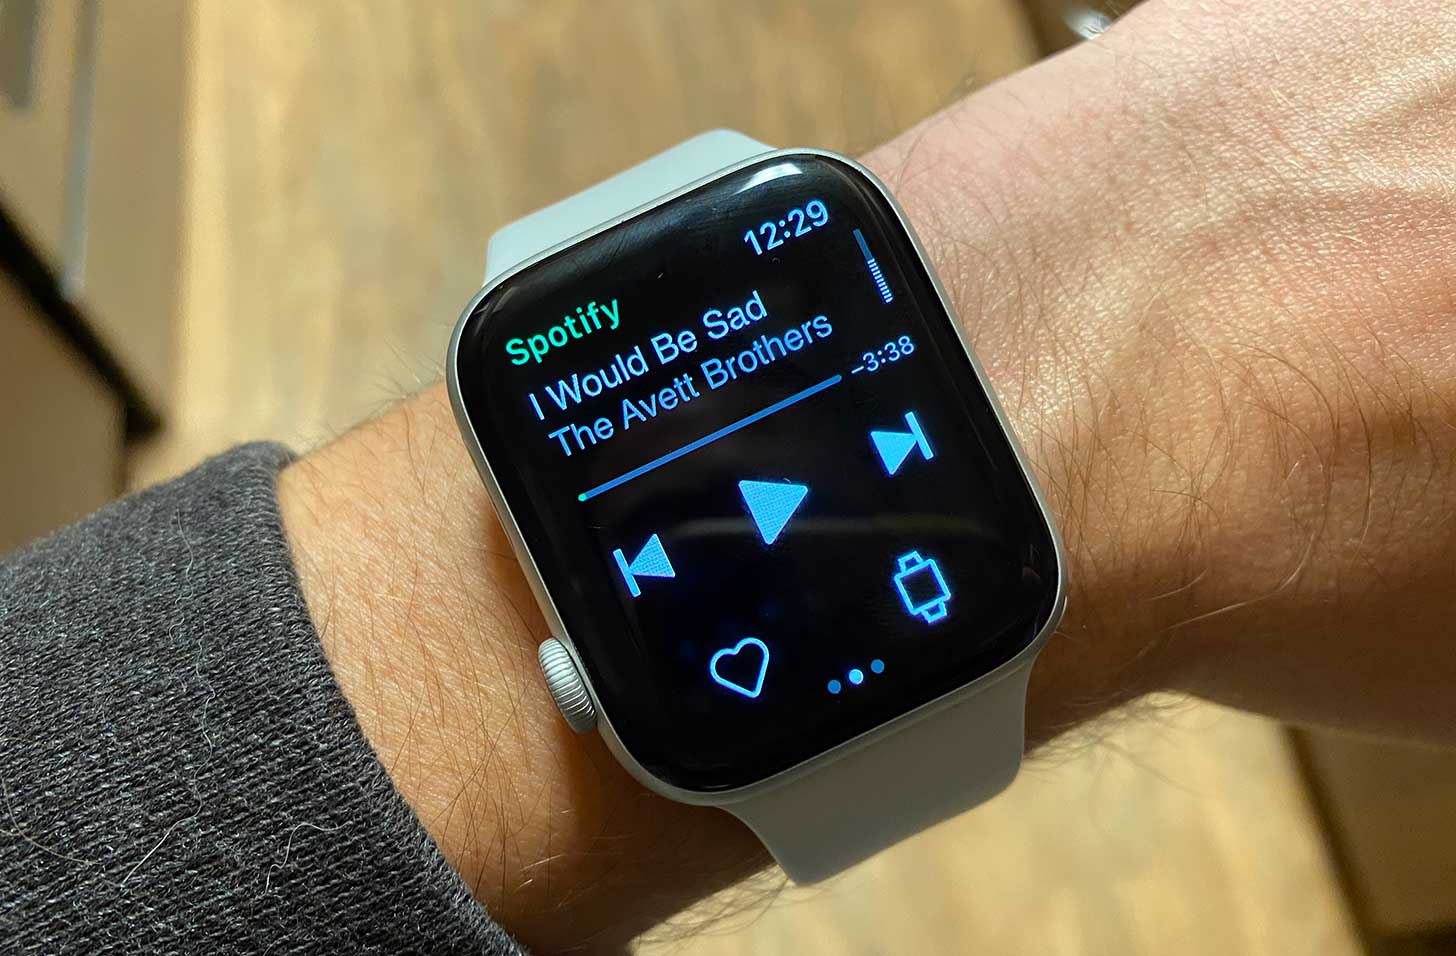 how to download spotify music on apple watch